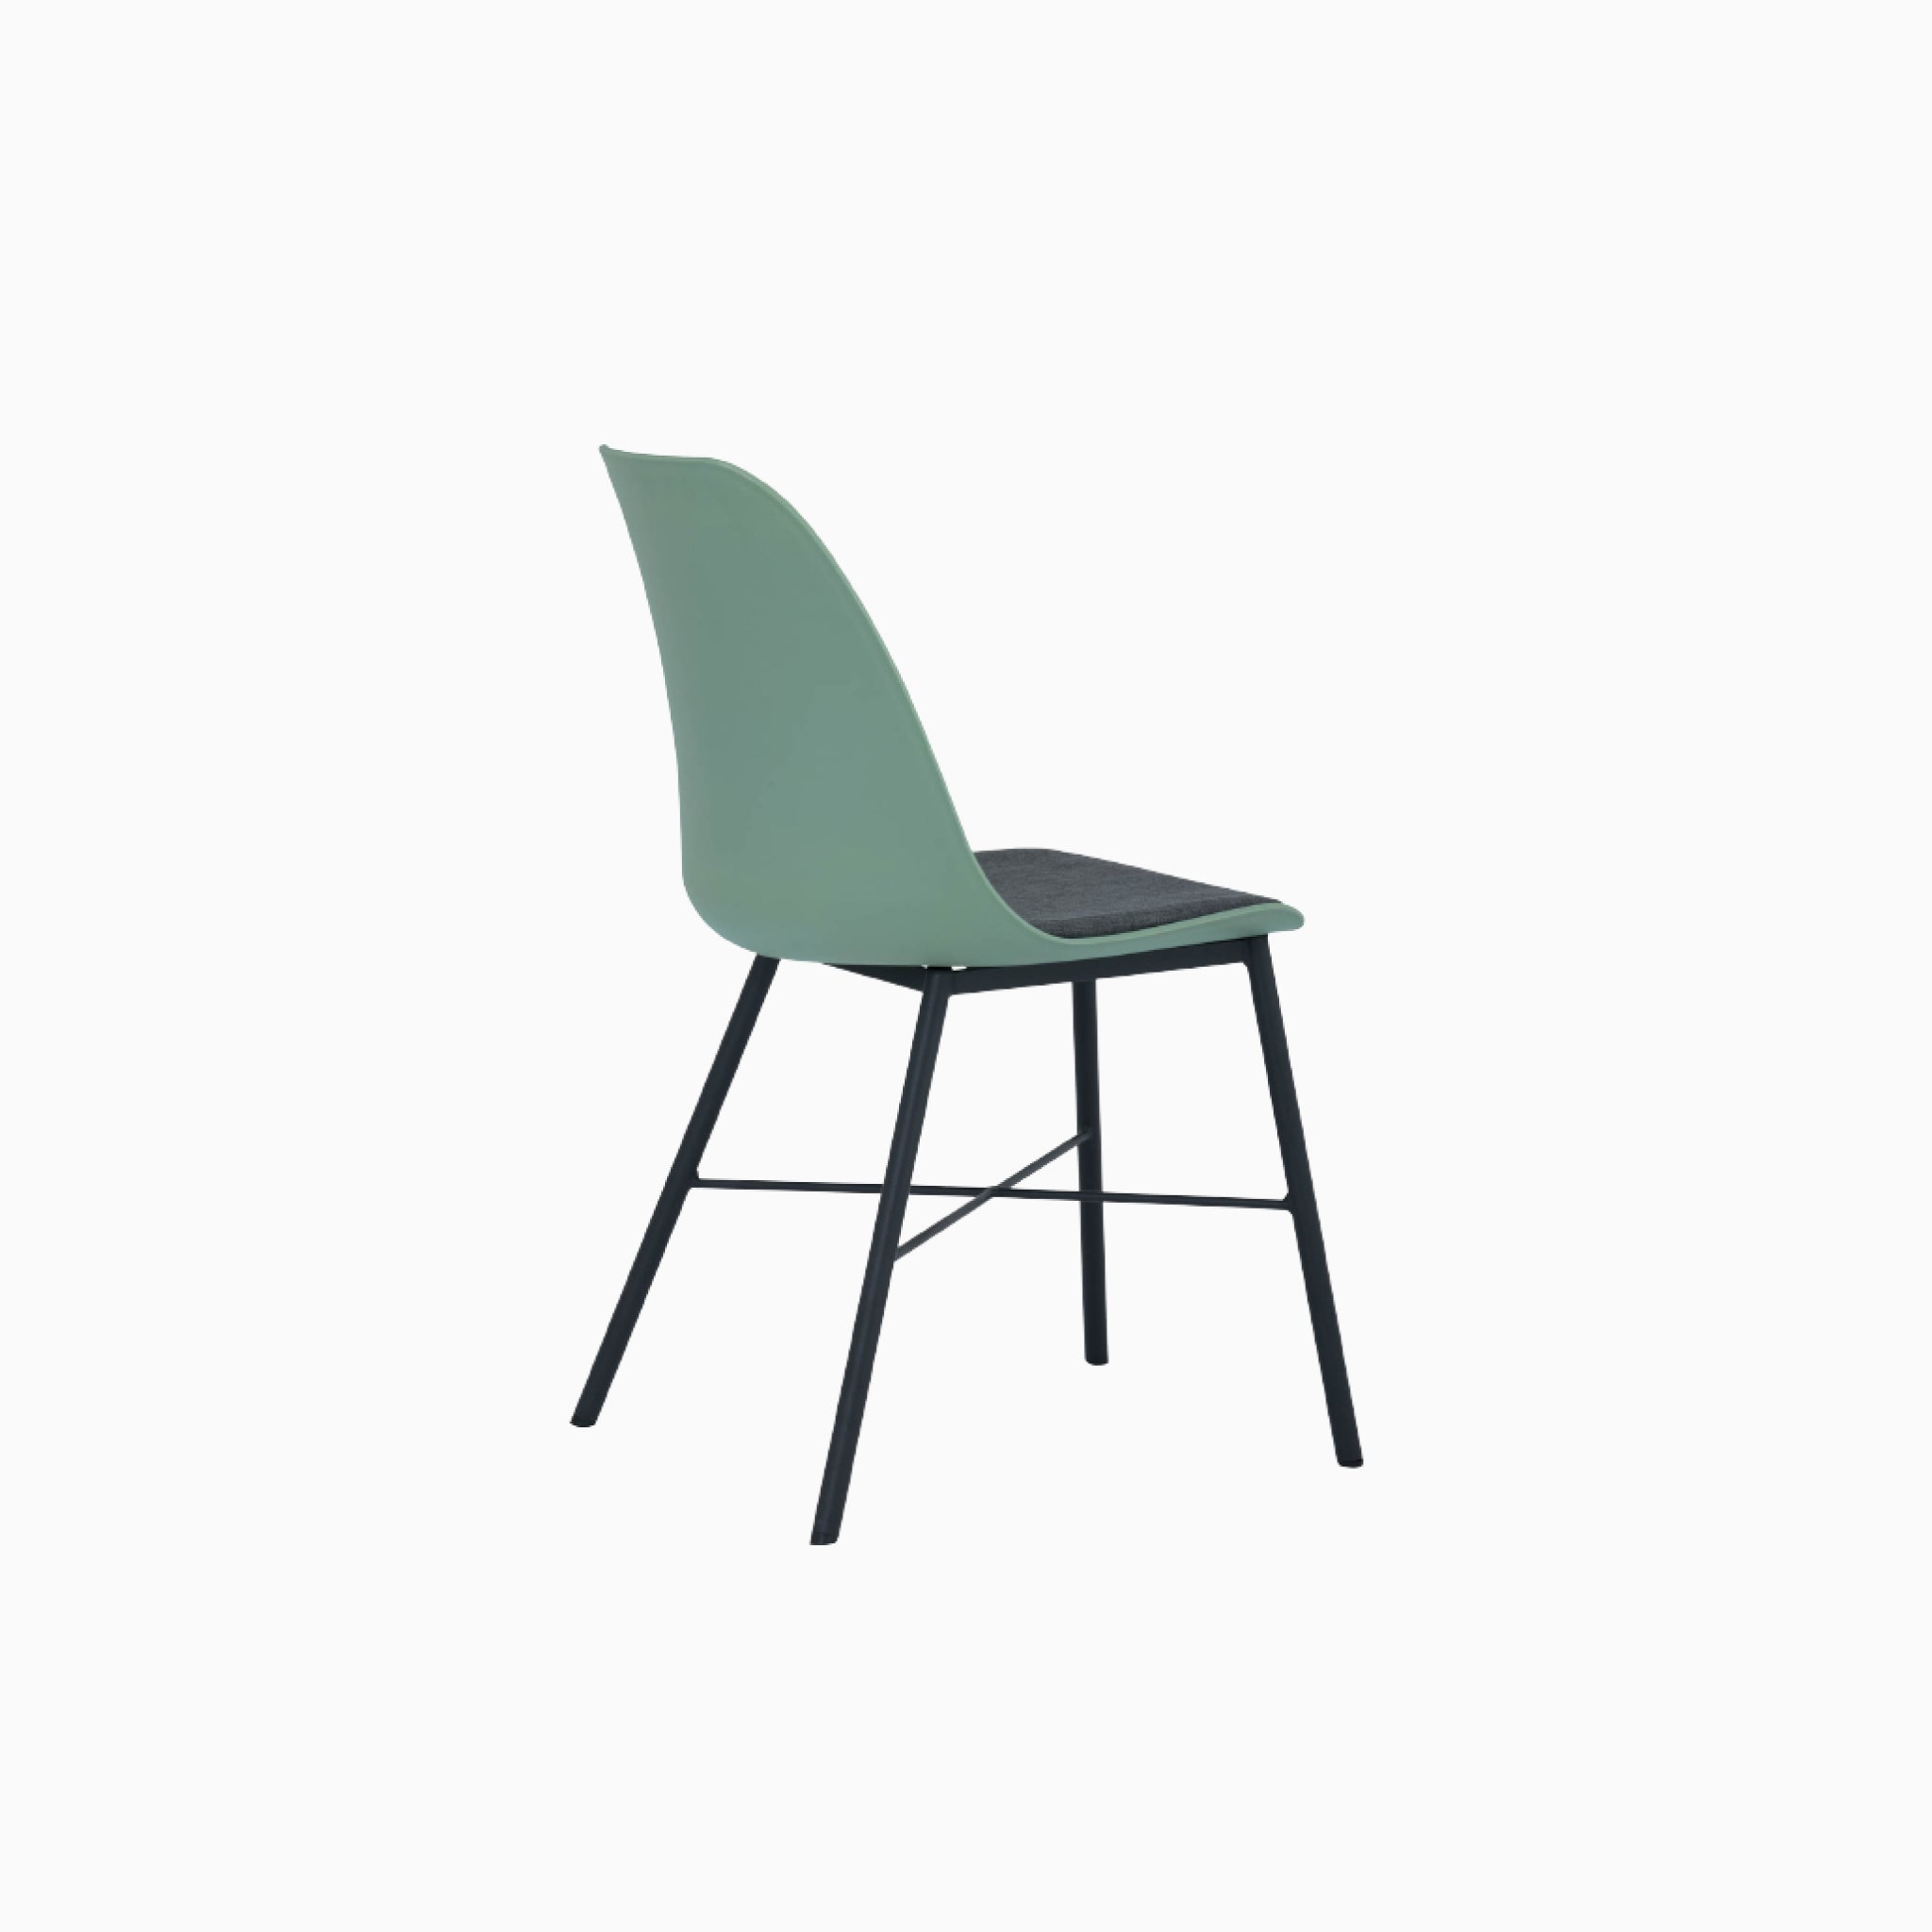 Lumo Green Dining Chair with Black Leg (Set of 2)